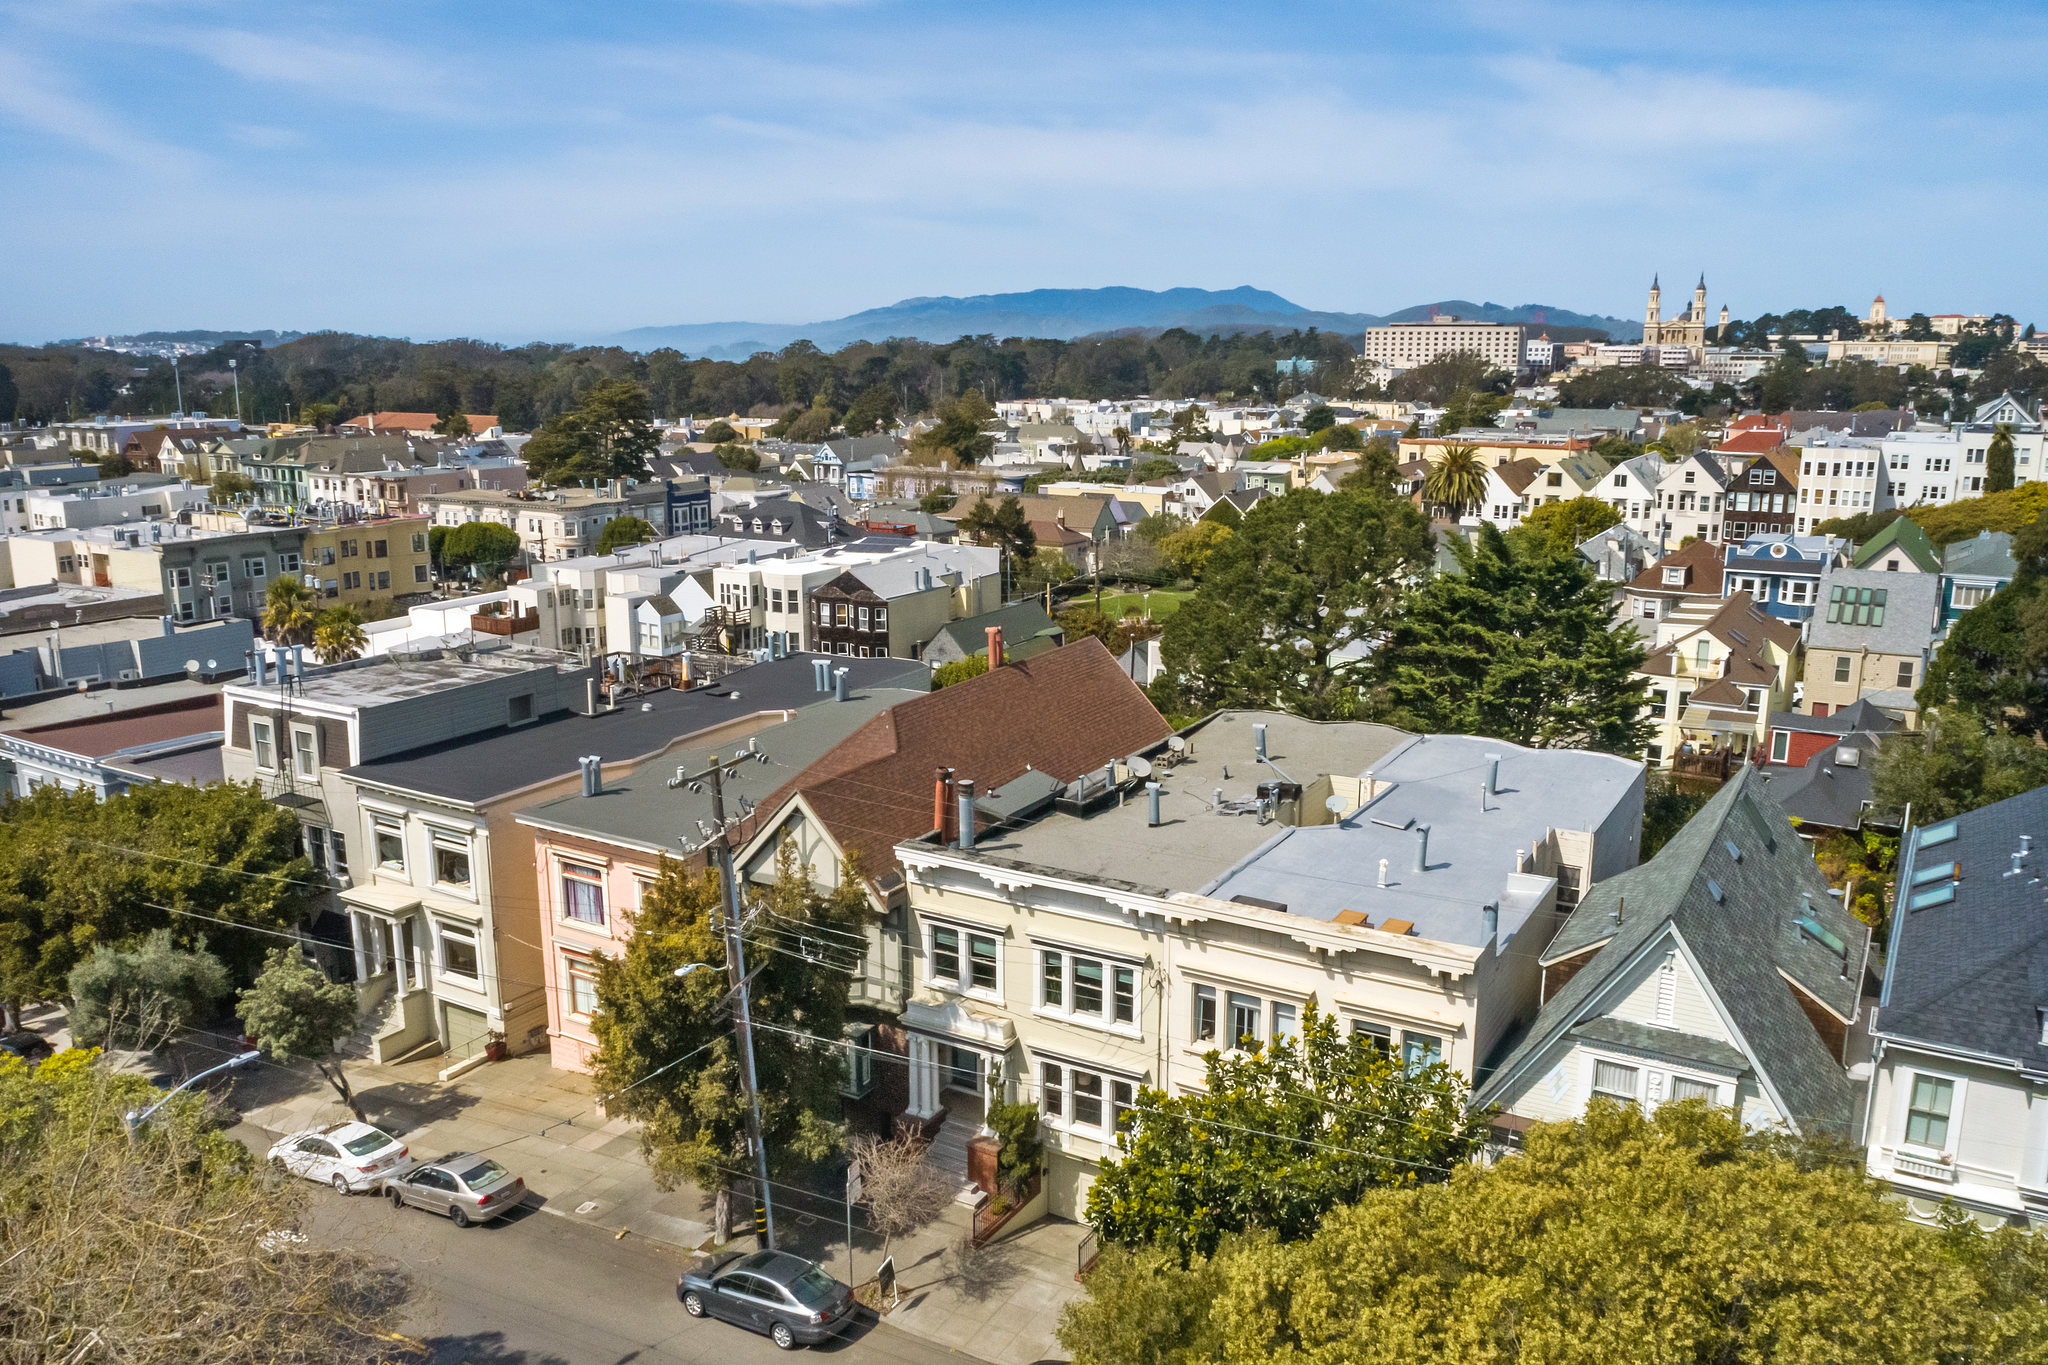 Property Photo: Aerial view of 38 Parnassus Avenue, showing the surrounding neighborhood